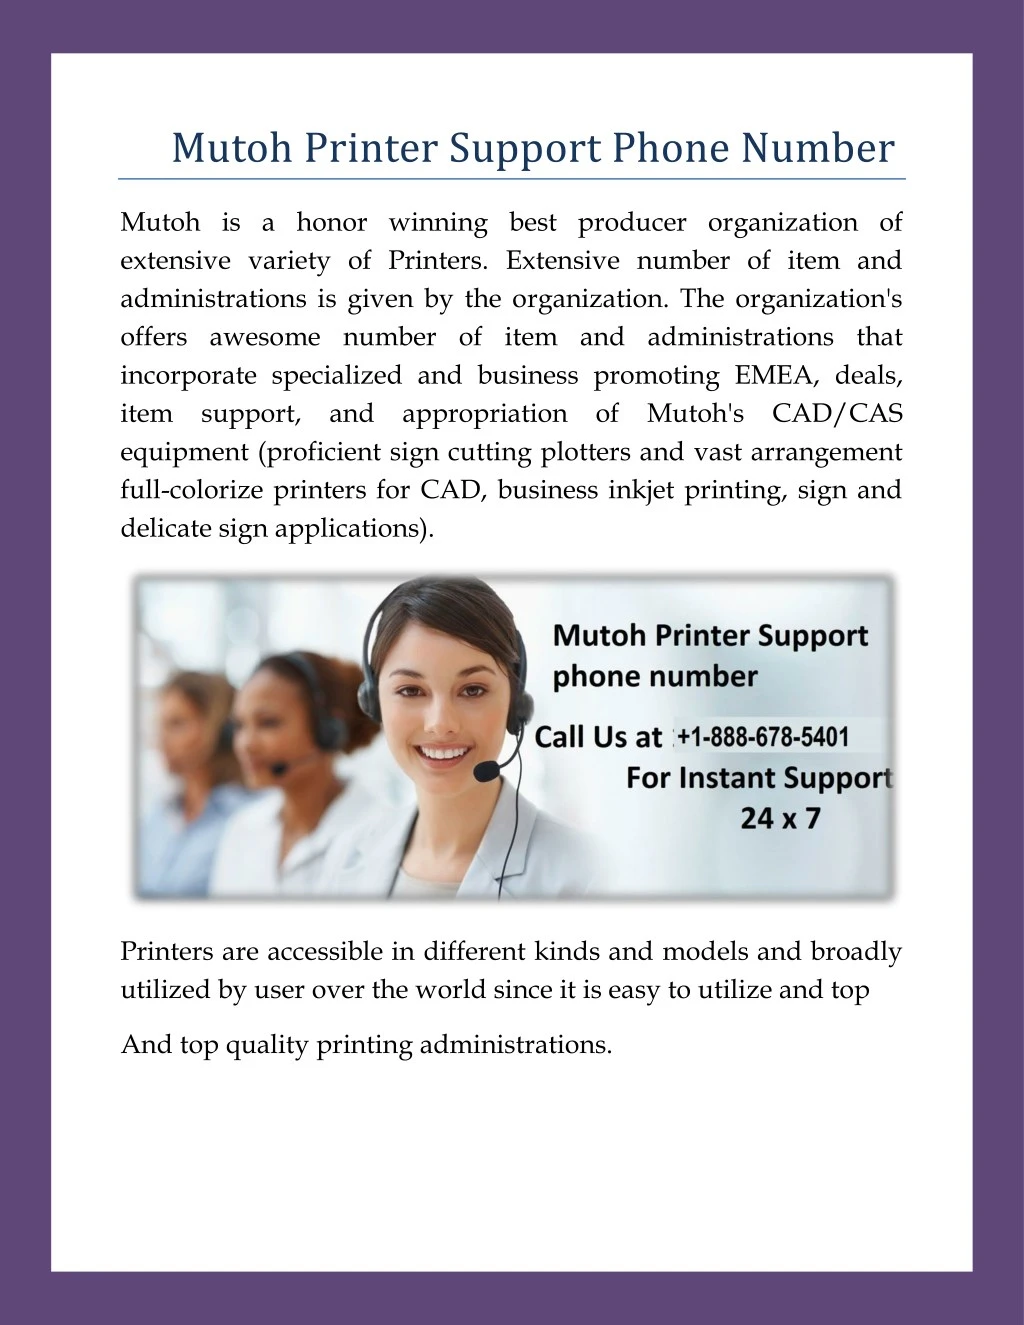 mutoh printer support phone number